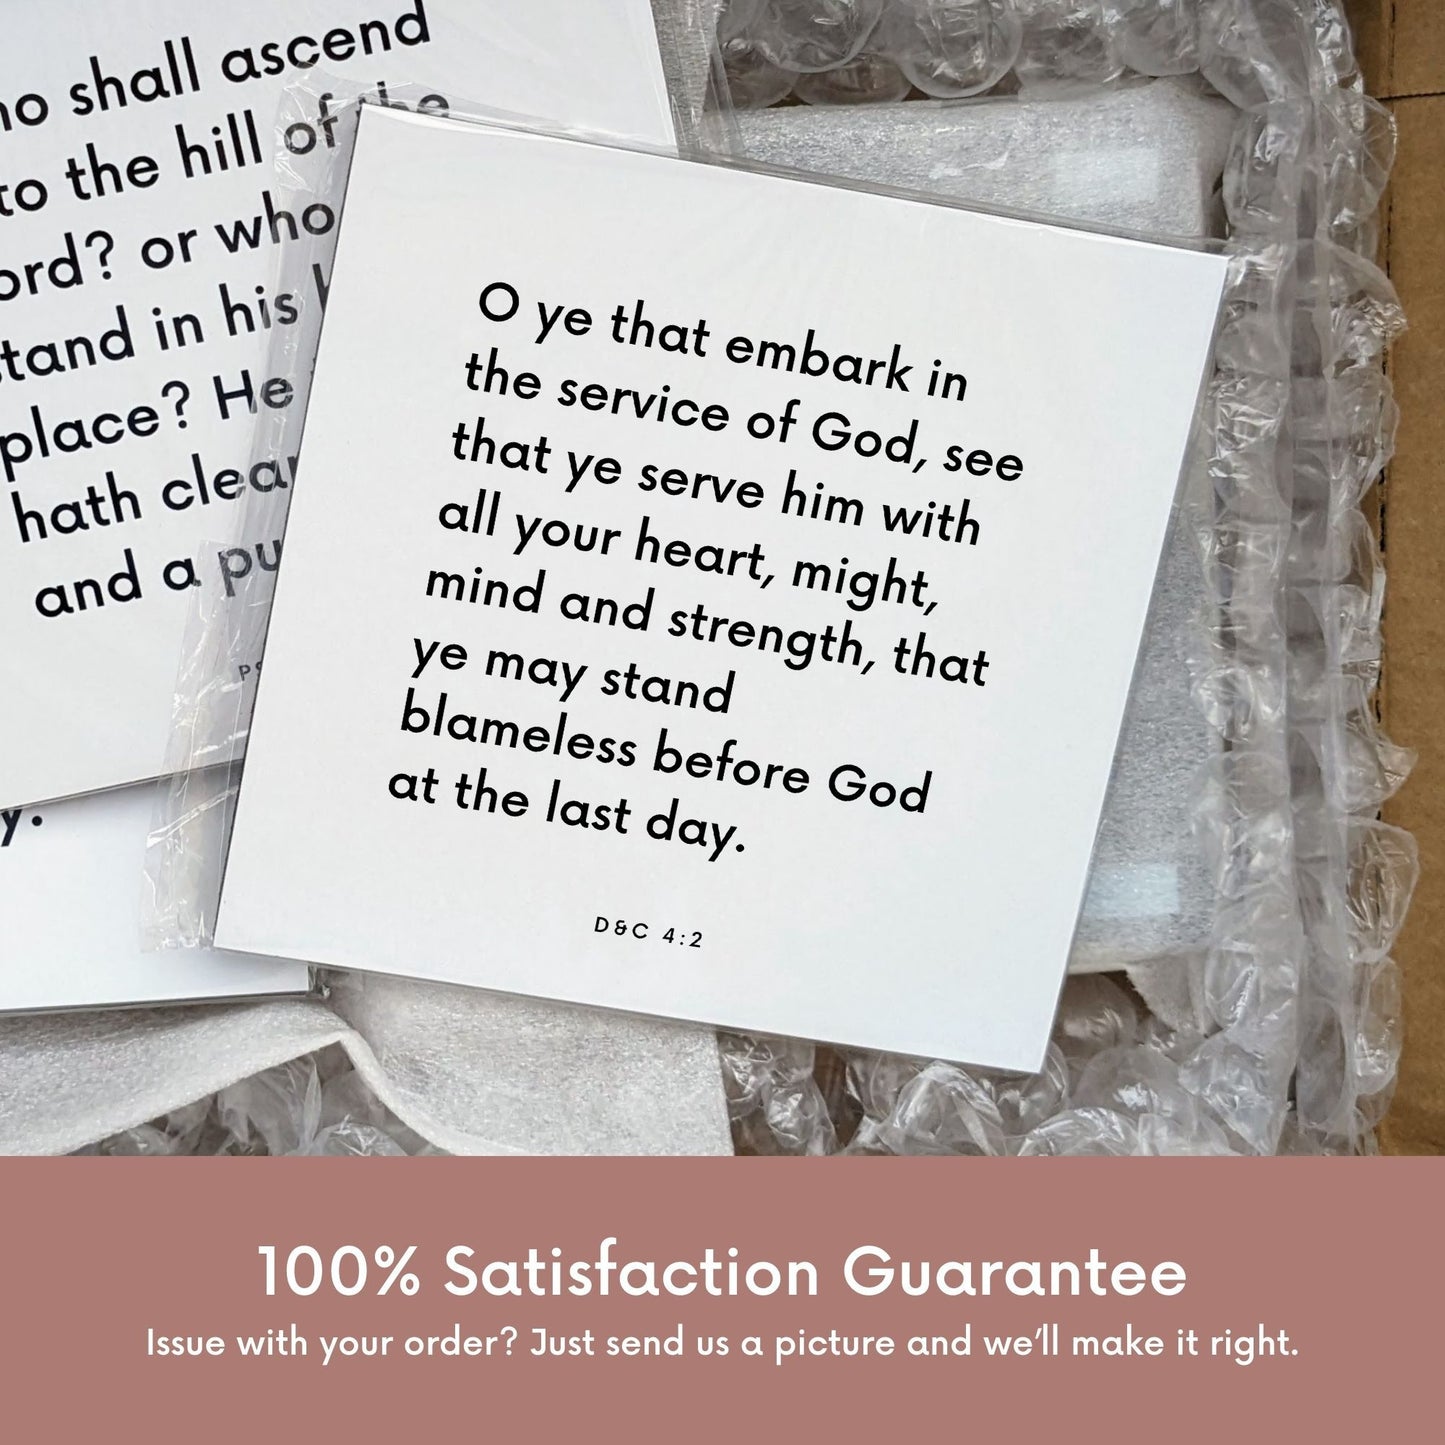 Shipping materials for scripture tile of D&C 4:2 - "O ye that embark in the service of God"